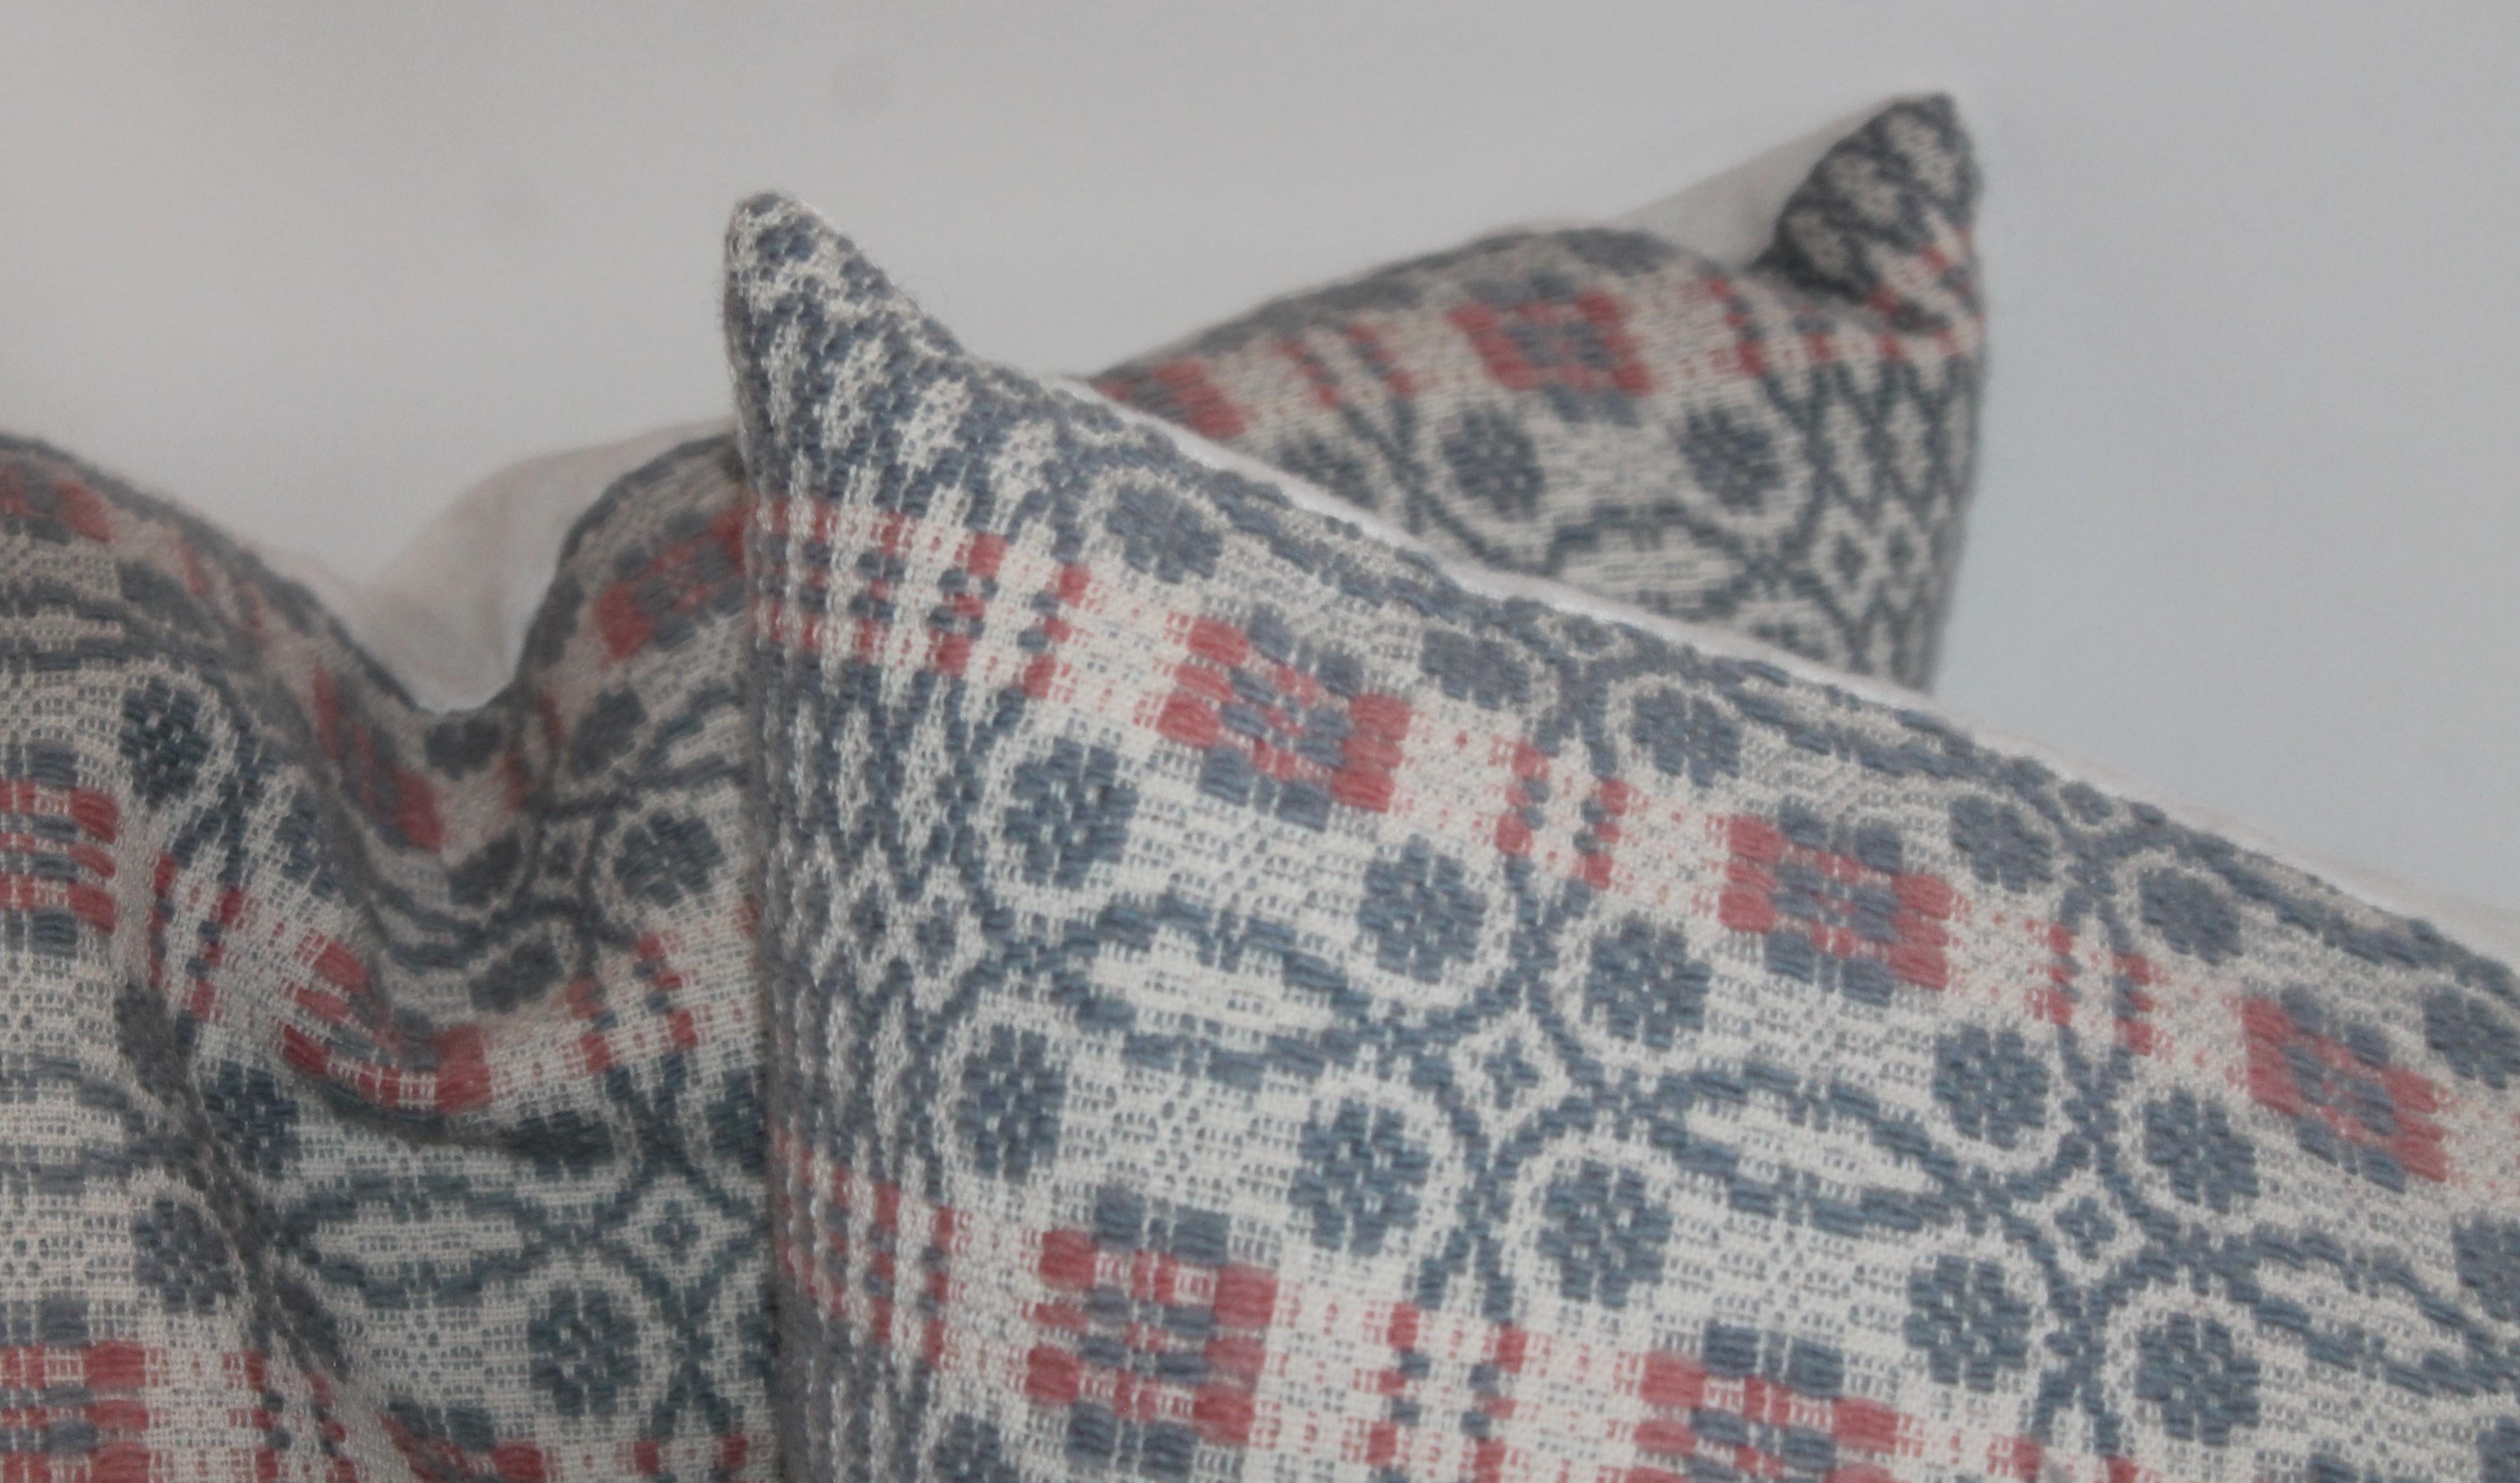 These fine hand woven coverlet pillows in blue grey with salmon trim. The backings are in homespun cotton linen. Sold as a group of four.